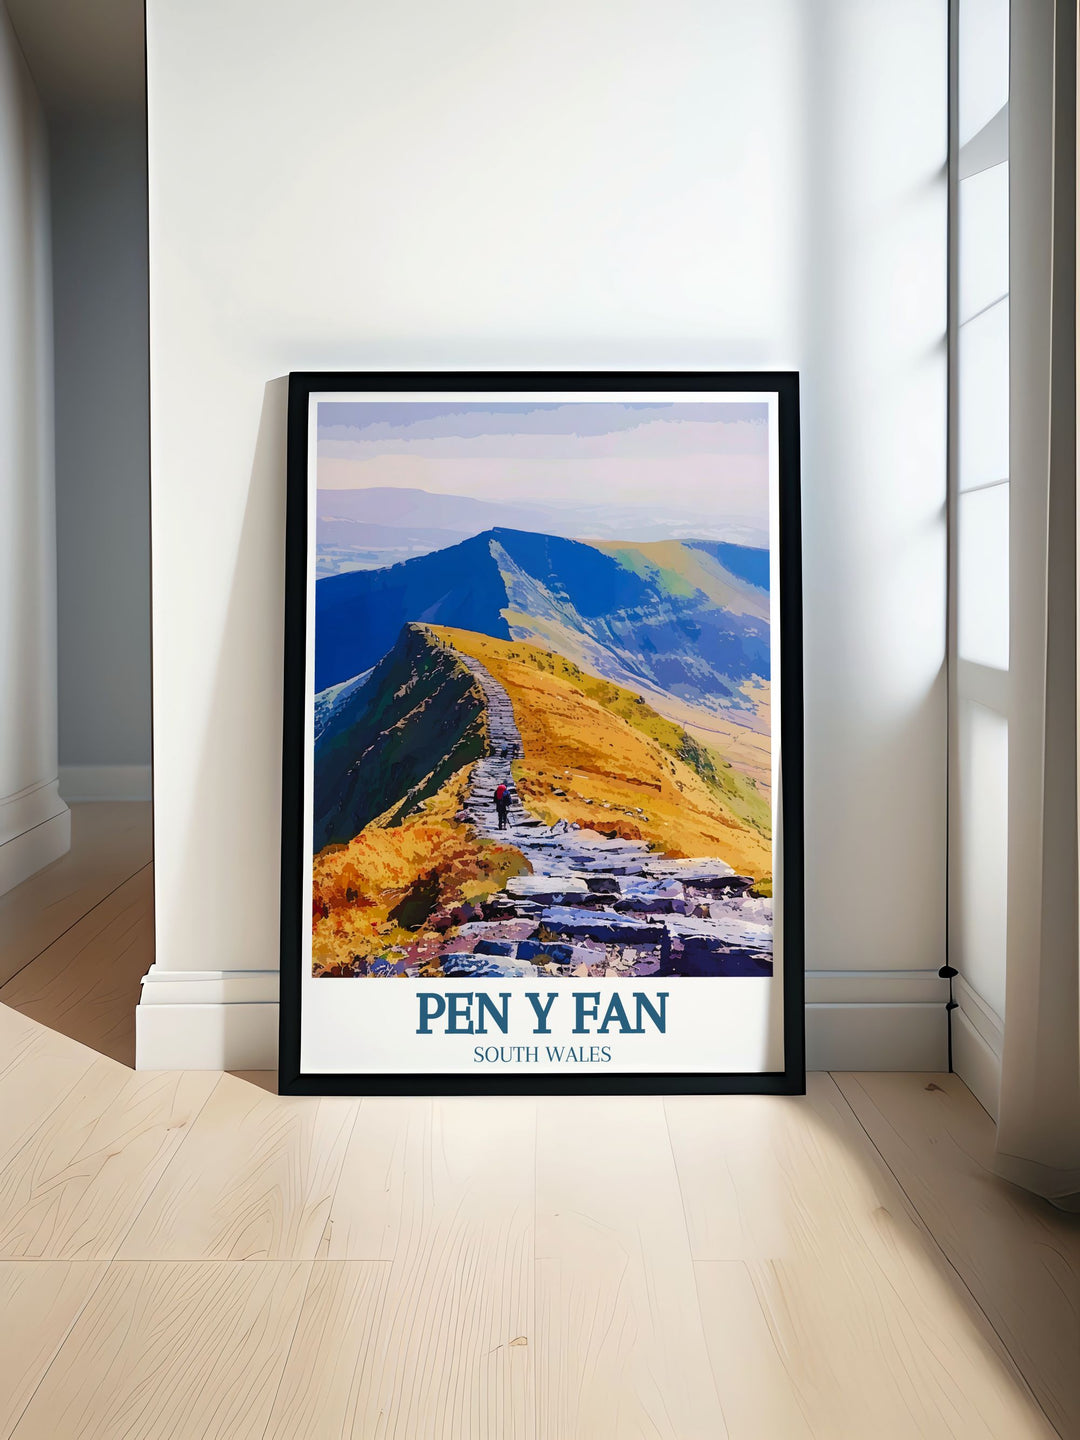 A breathtaking Pen Y Fan Poster capturing the natural beauty of Brecon Beacons in South Wales. Perfect for nature lovers and hikers this print brings the serene landscapes of the Welsh mountains into your home decor.